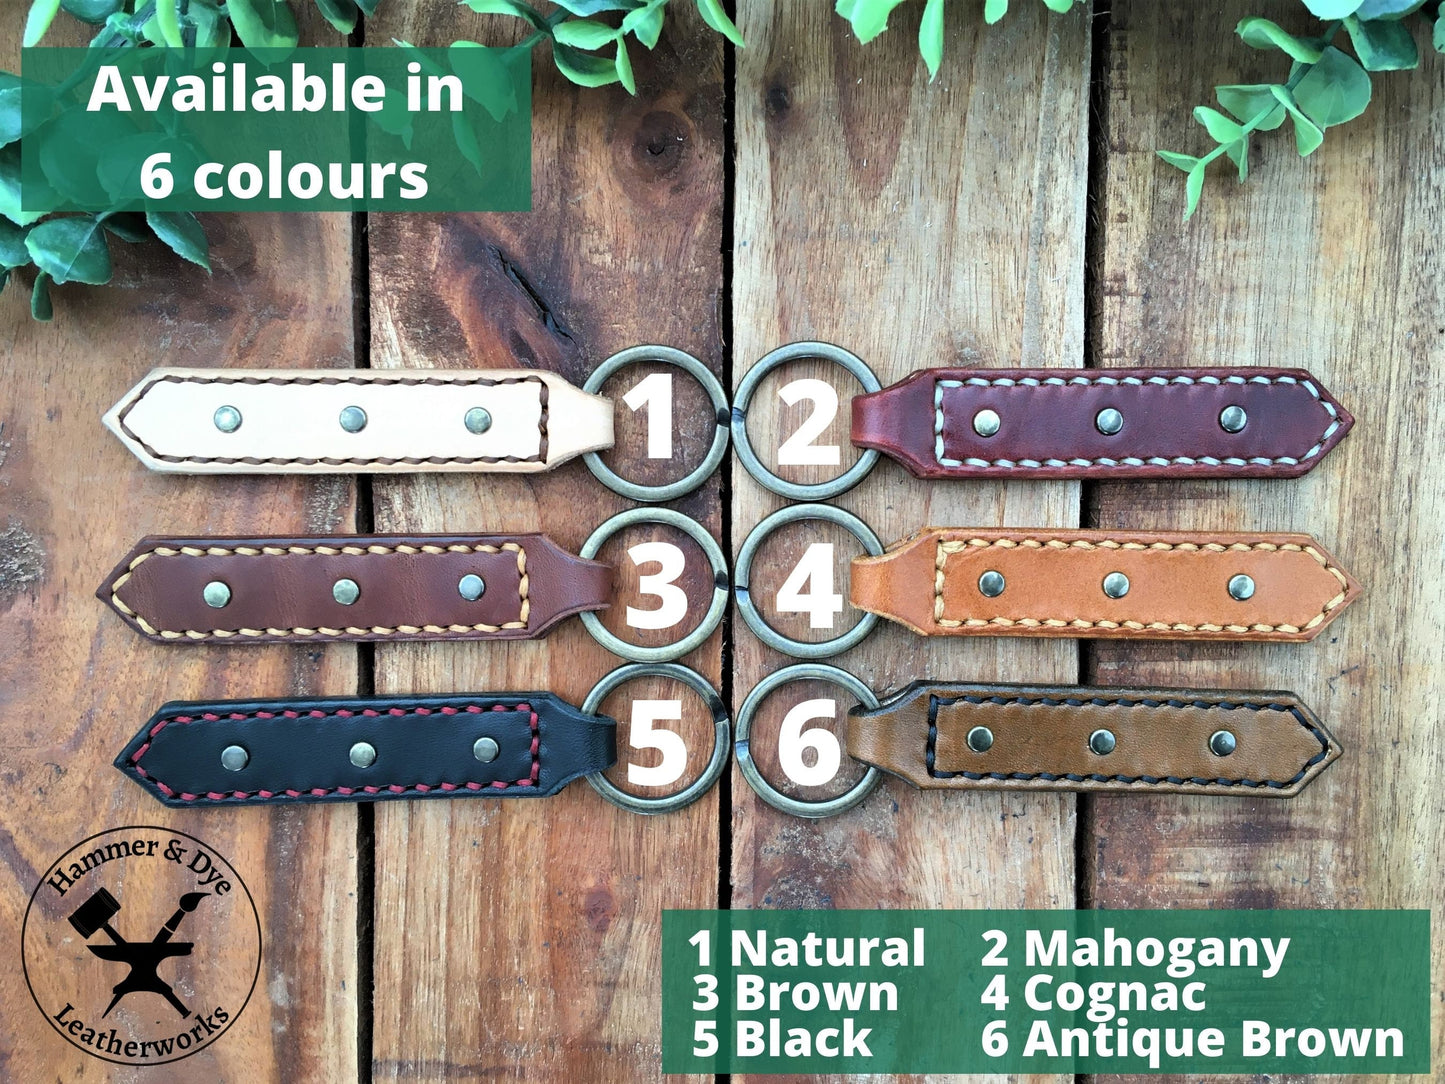 Available Leather Color for the Handmade Leather Studded Keychains